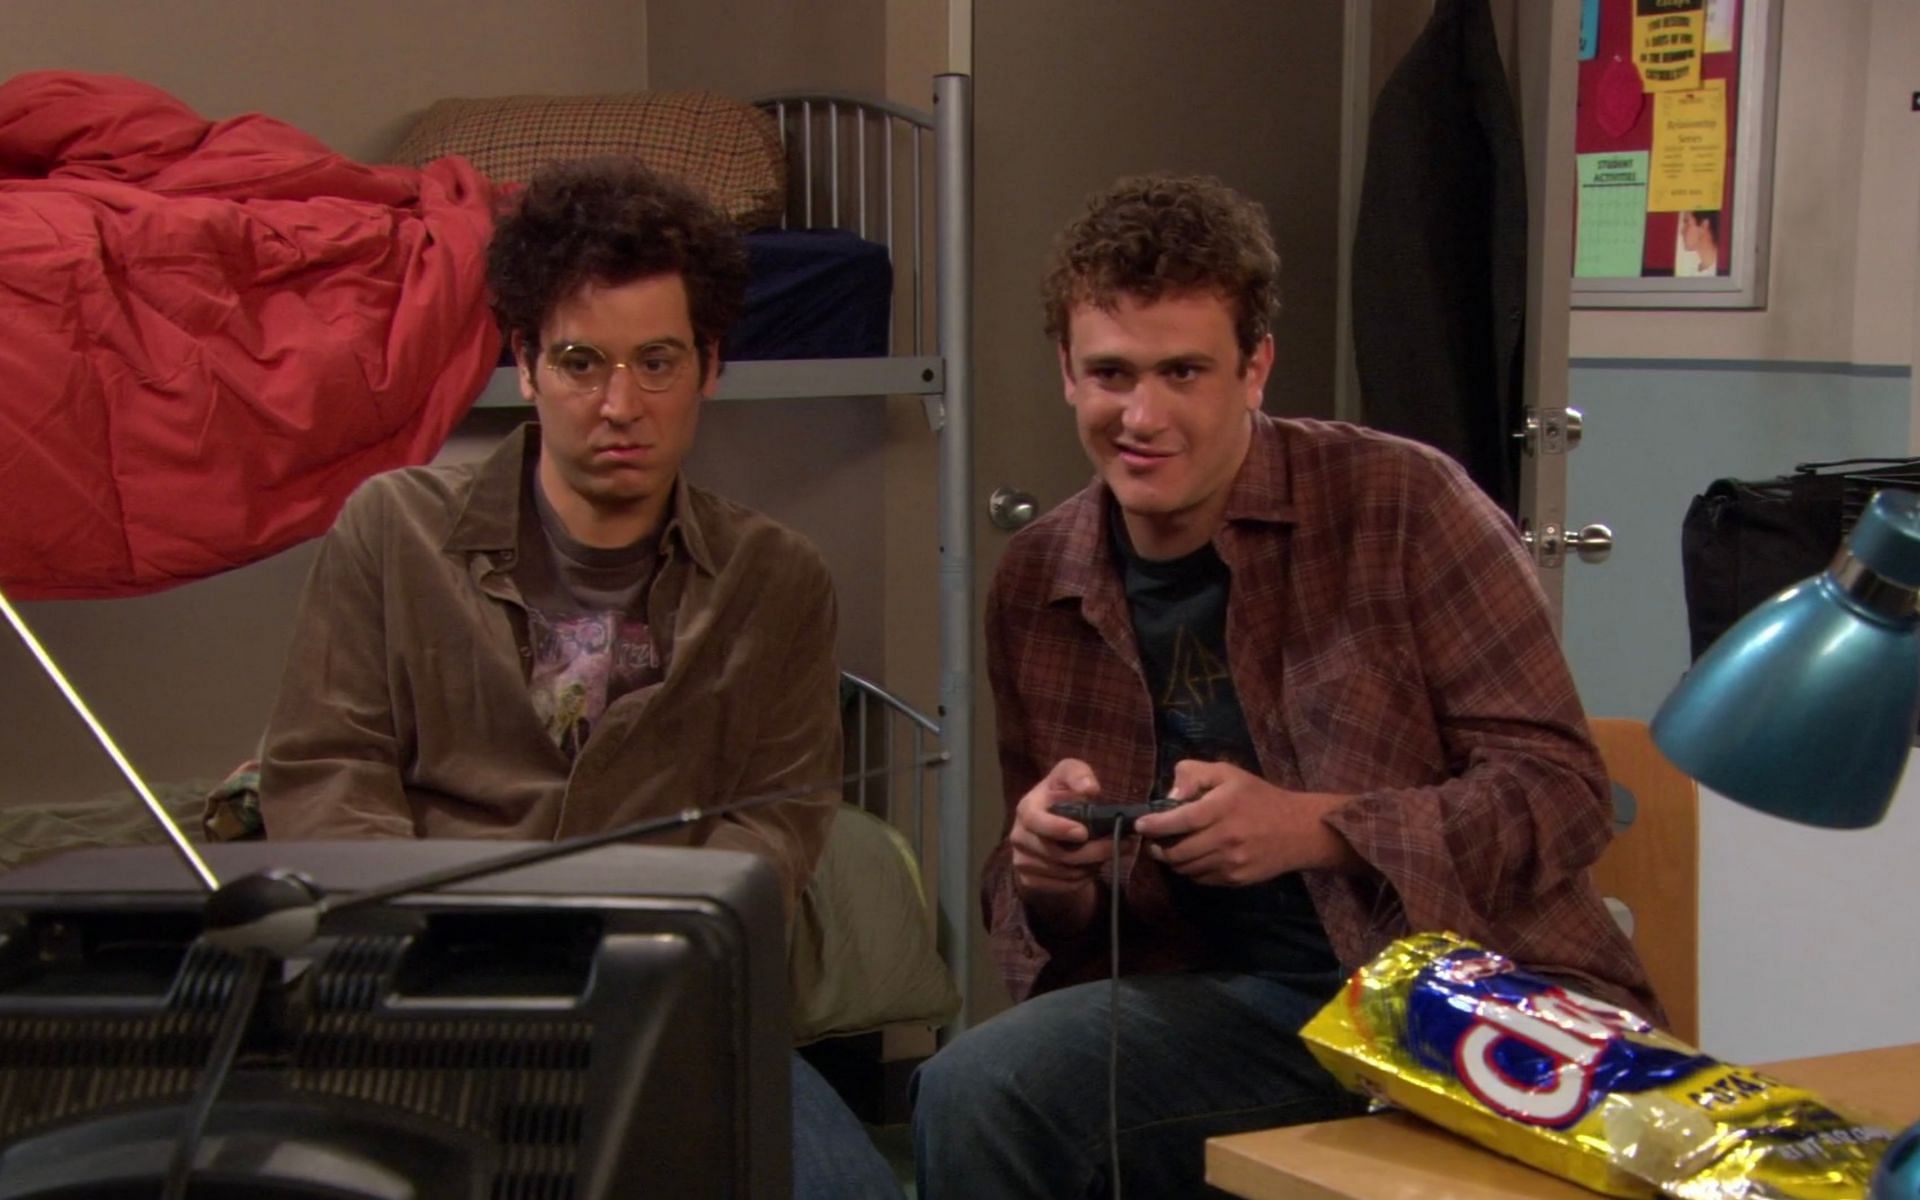 Ted and Marshall playing Playstation 2 from a flashback in 1996 (Image via Disney+hotstar)